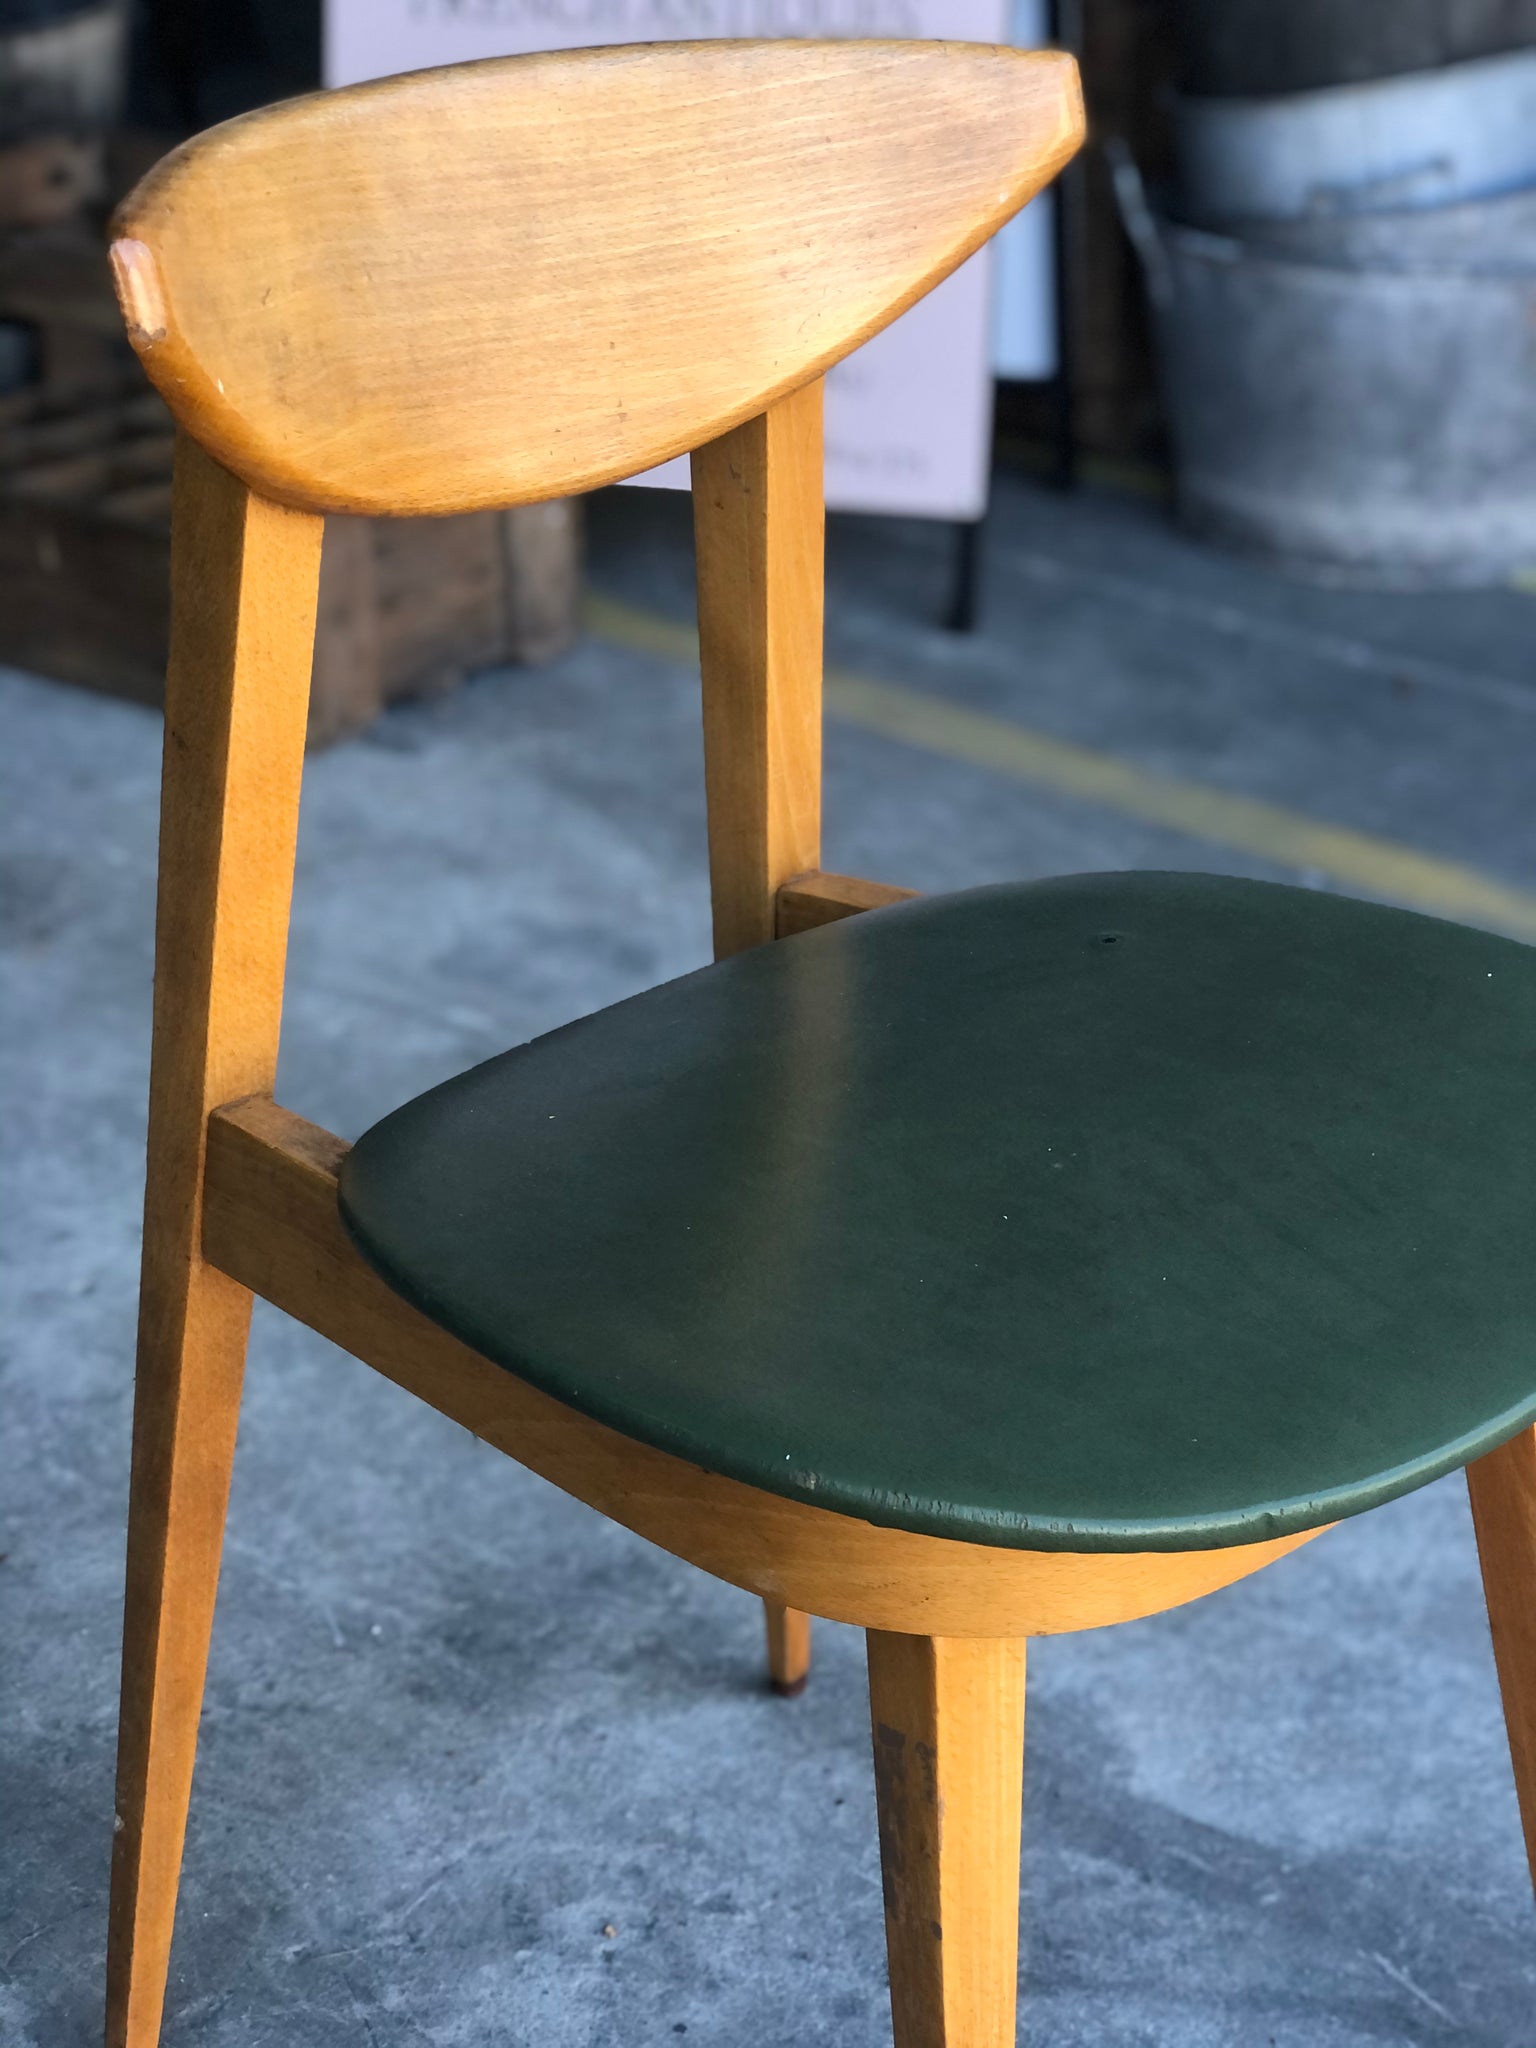 Vintage French retro chair with upholstered (green) seat